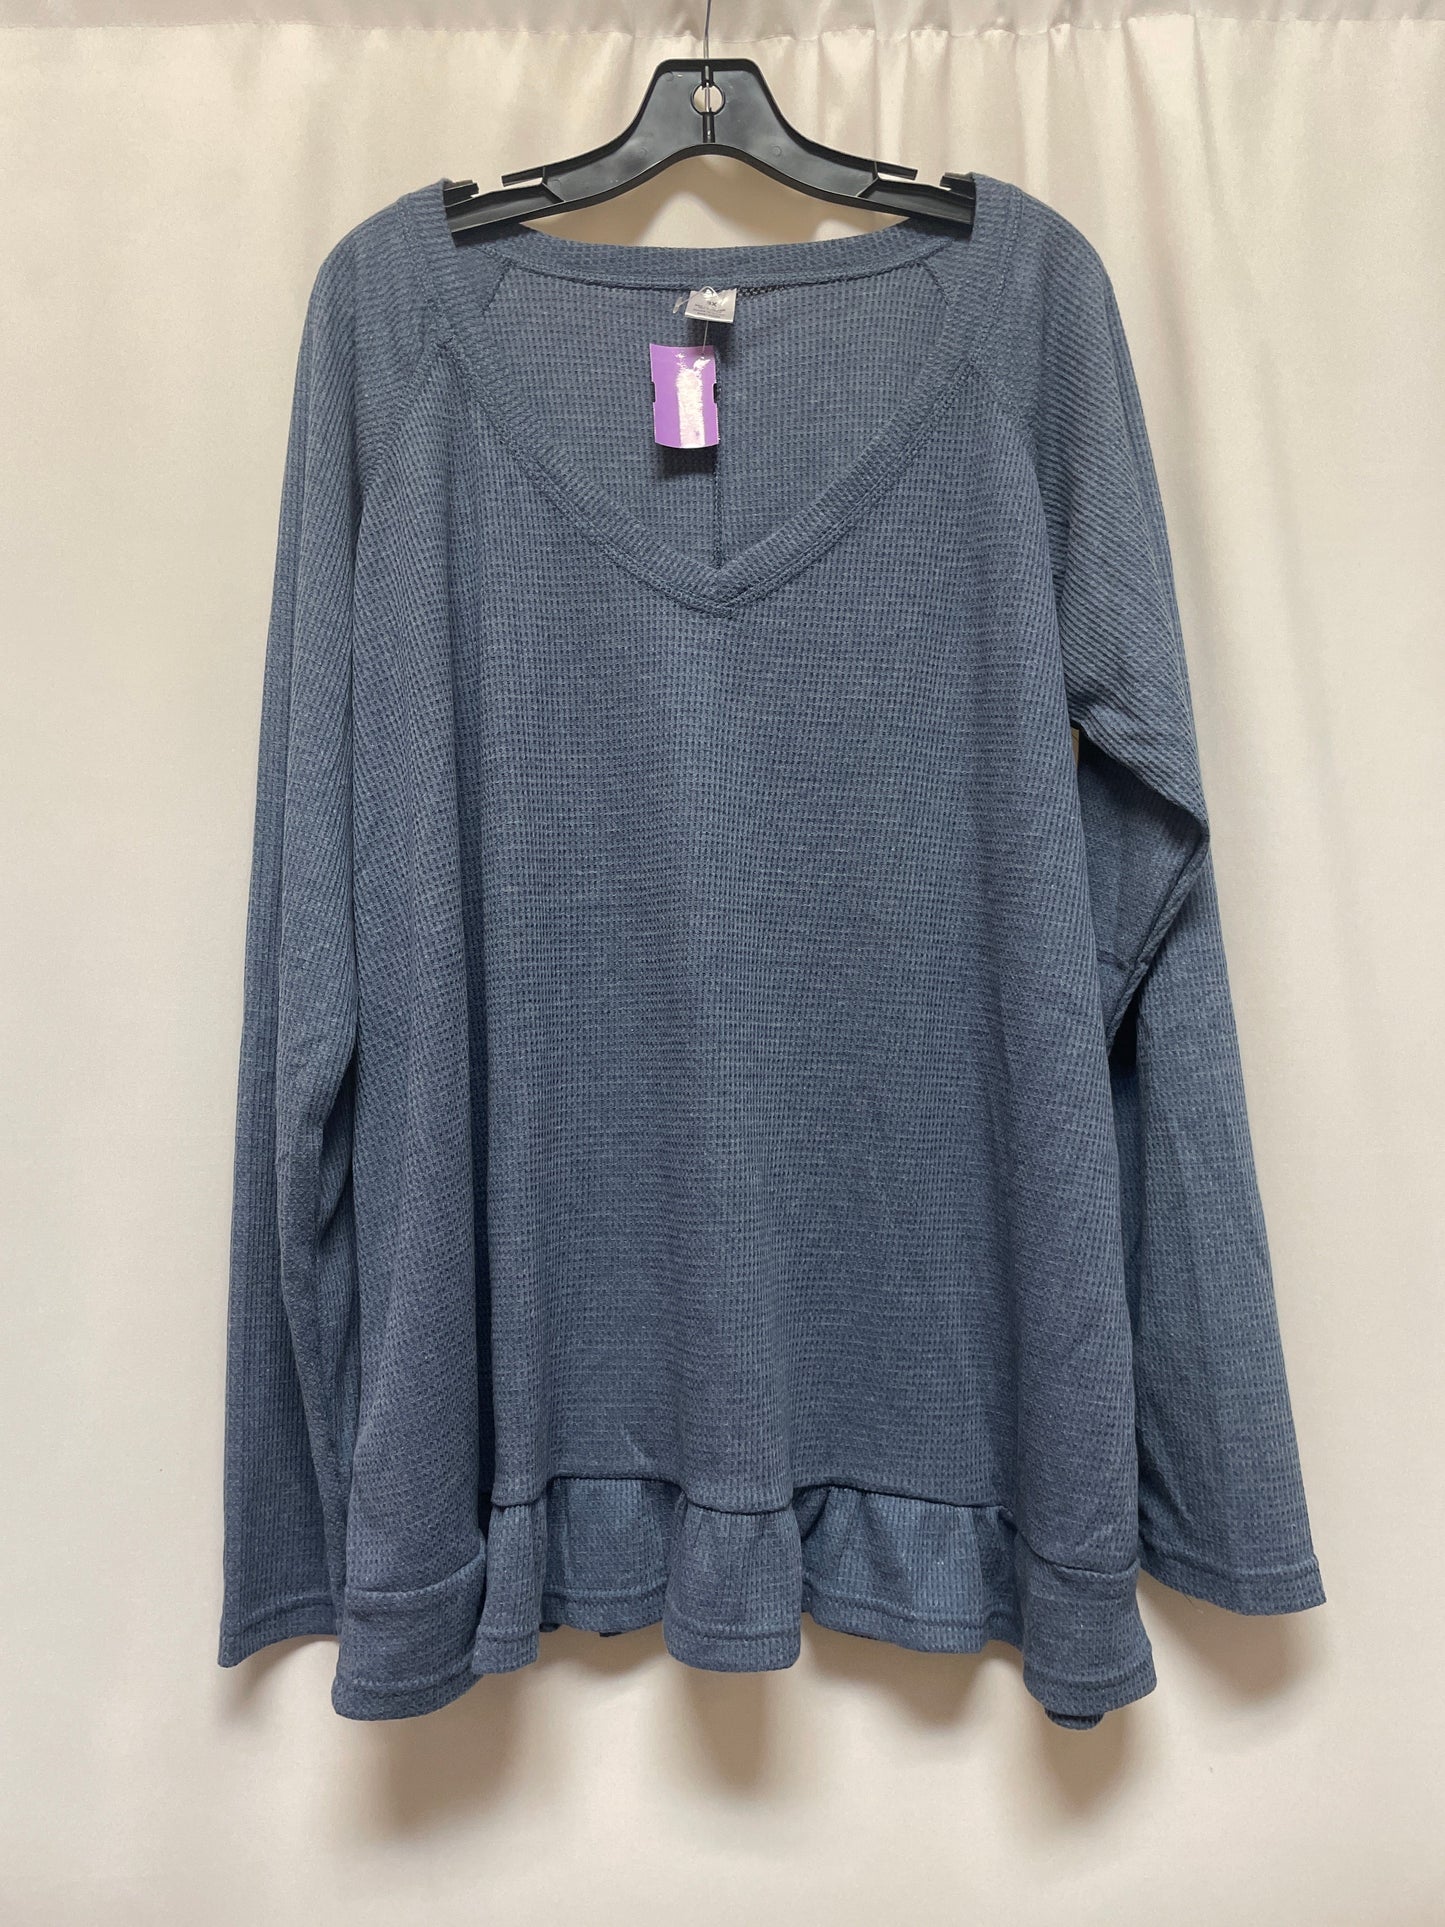 Blue Top Long Sleeve Clothes Mentor, Size 3x